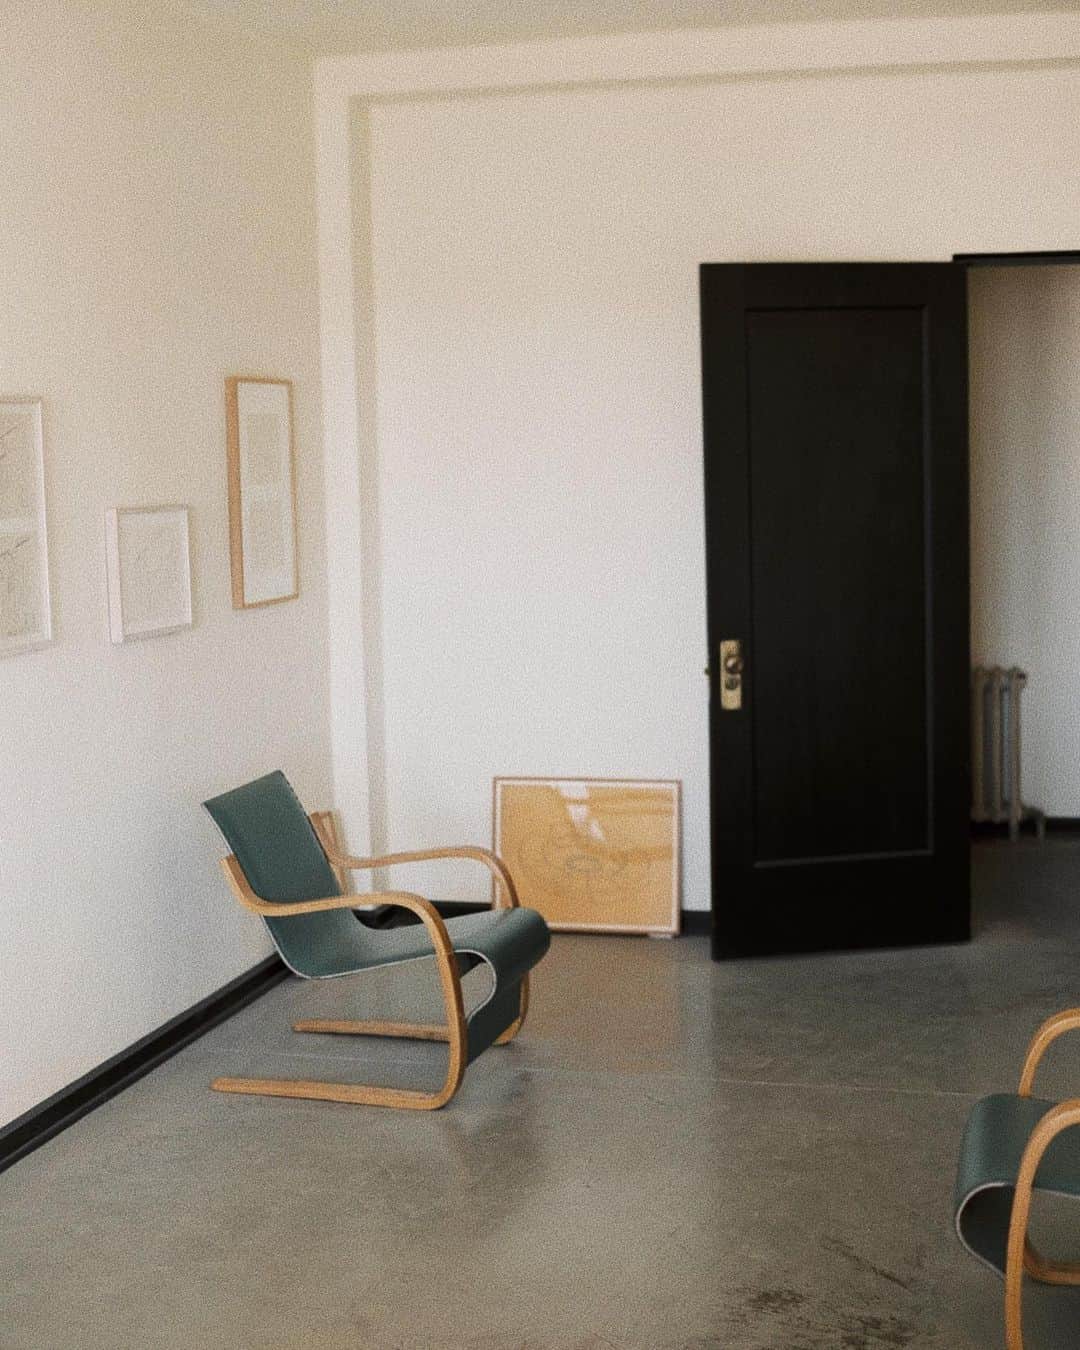 C E R E A Lのインスタグラム：「Judd’s buildings in Marfa can feel like a museum of ‘specific objects’, frozen in time as a monument to one man. “But galleries and museums are so cold,” Rainer adds, “and the spaces Don created, the spaces we lived in, are warm”.  Permanent space - Donald Judd’s architecture in Marfa. From the archive, Cereal Volume 16, 2018.」